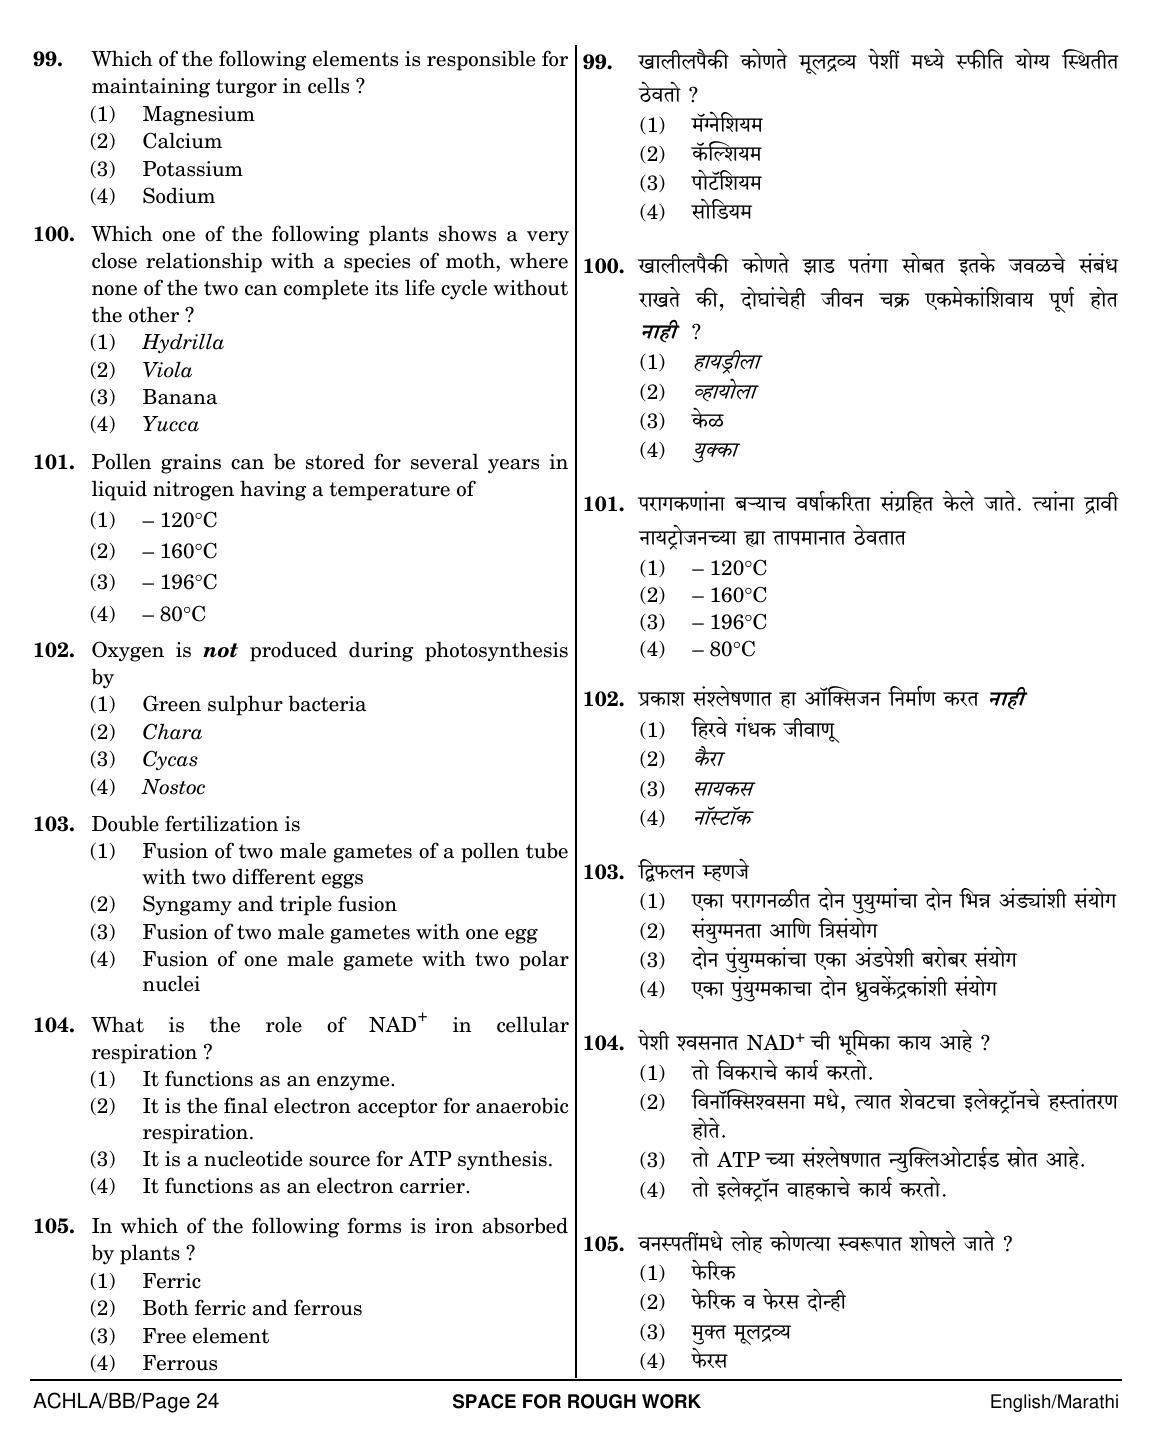 NEET Marathi BB 2018 Question Paper - Page 24